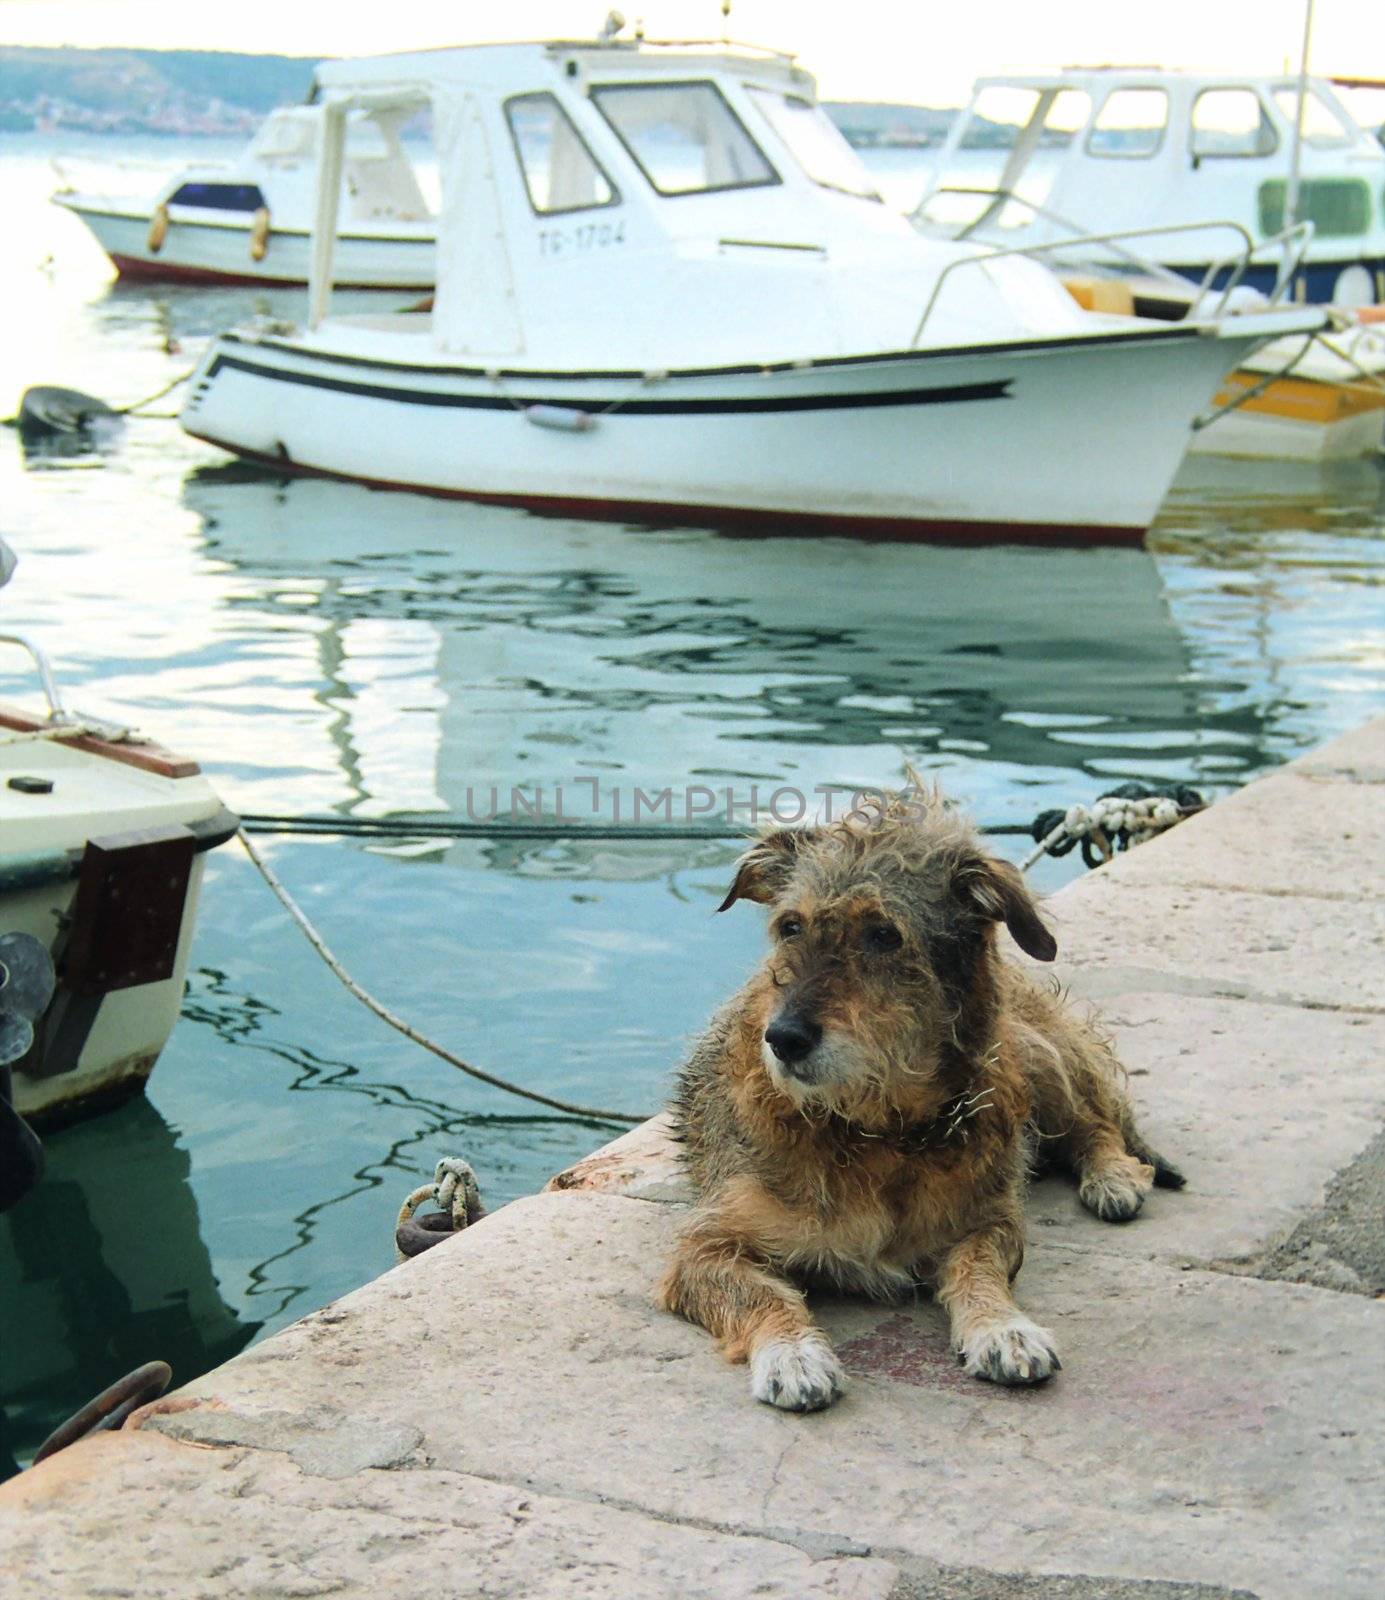 Wet dog on the pier near boats